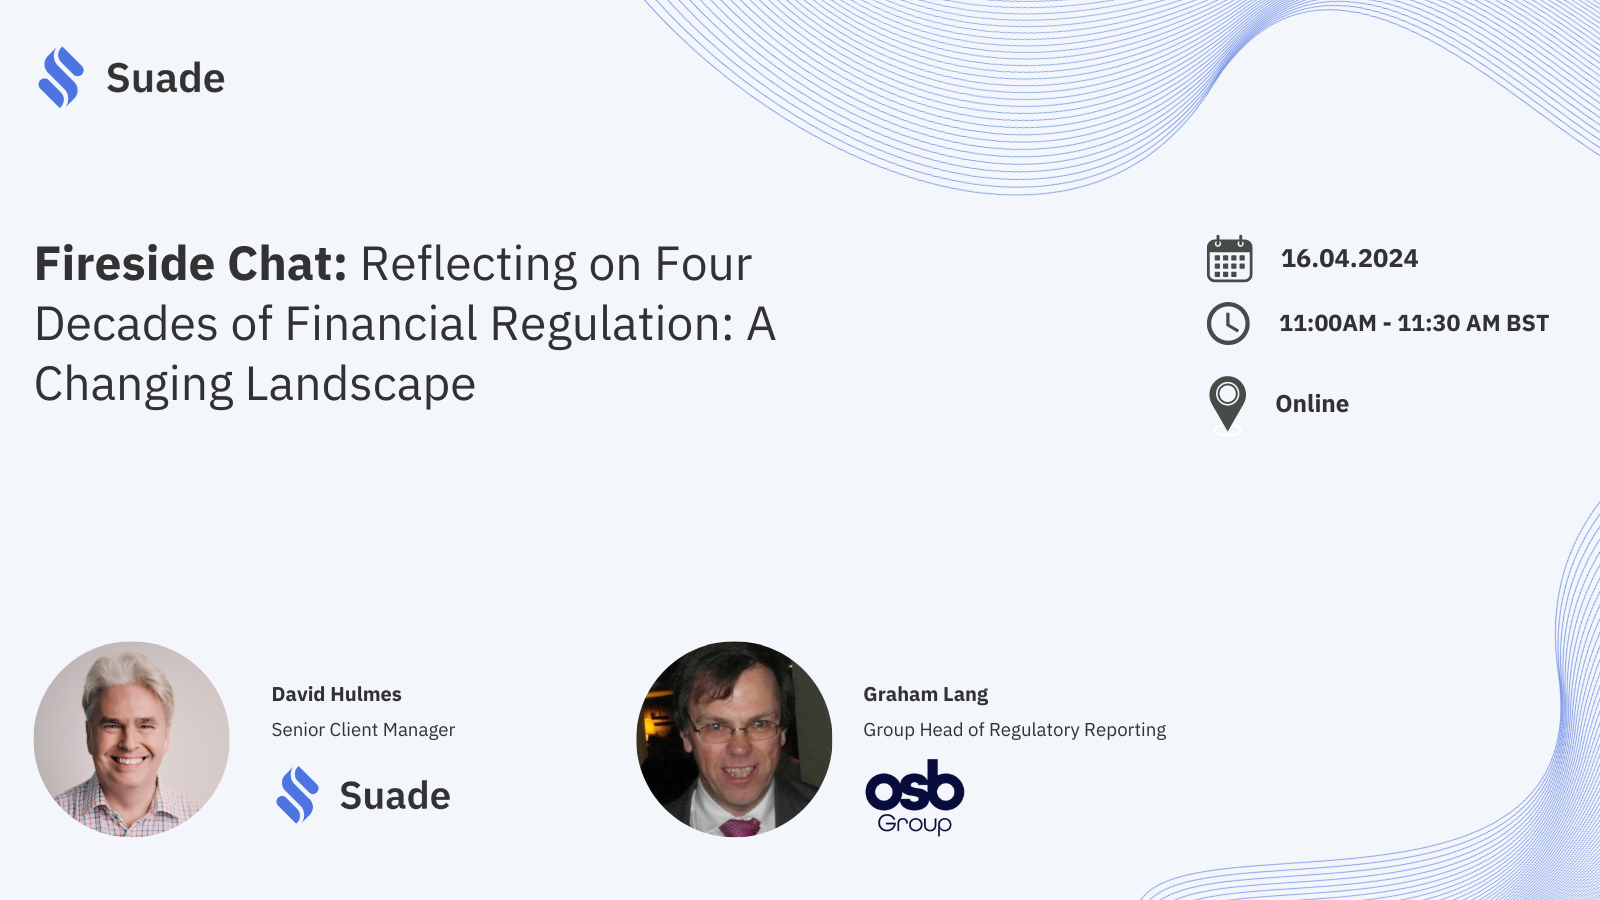 Fireside Chat: Reflecting on Four Decades of Financial Regulation: A Changing Landscape